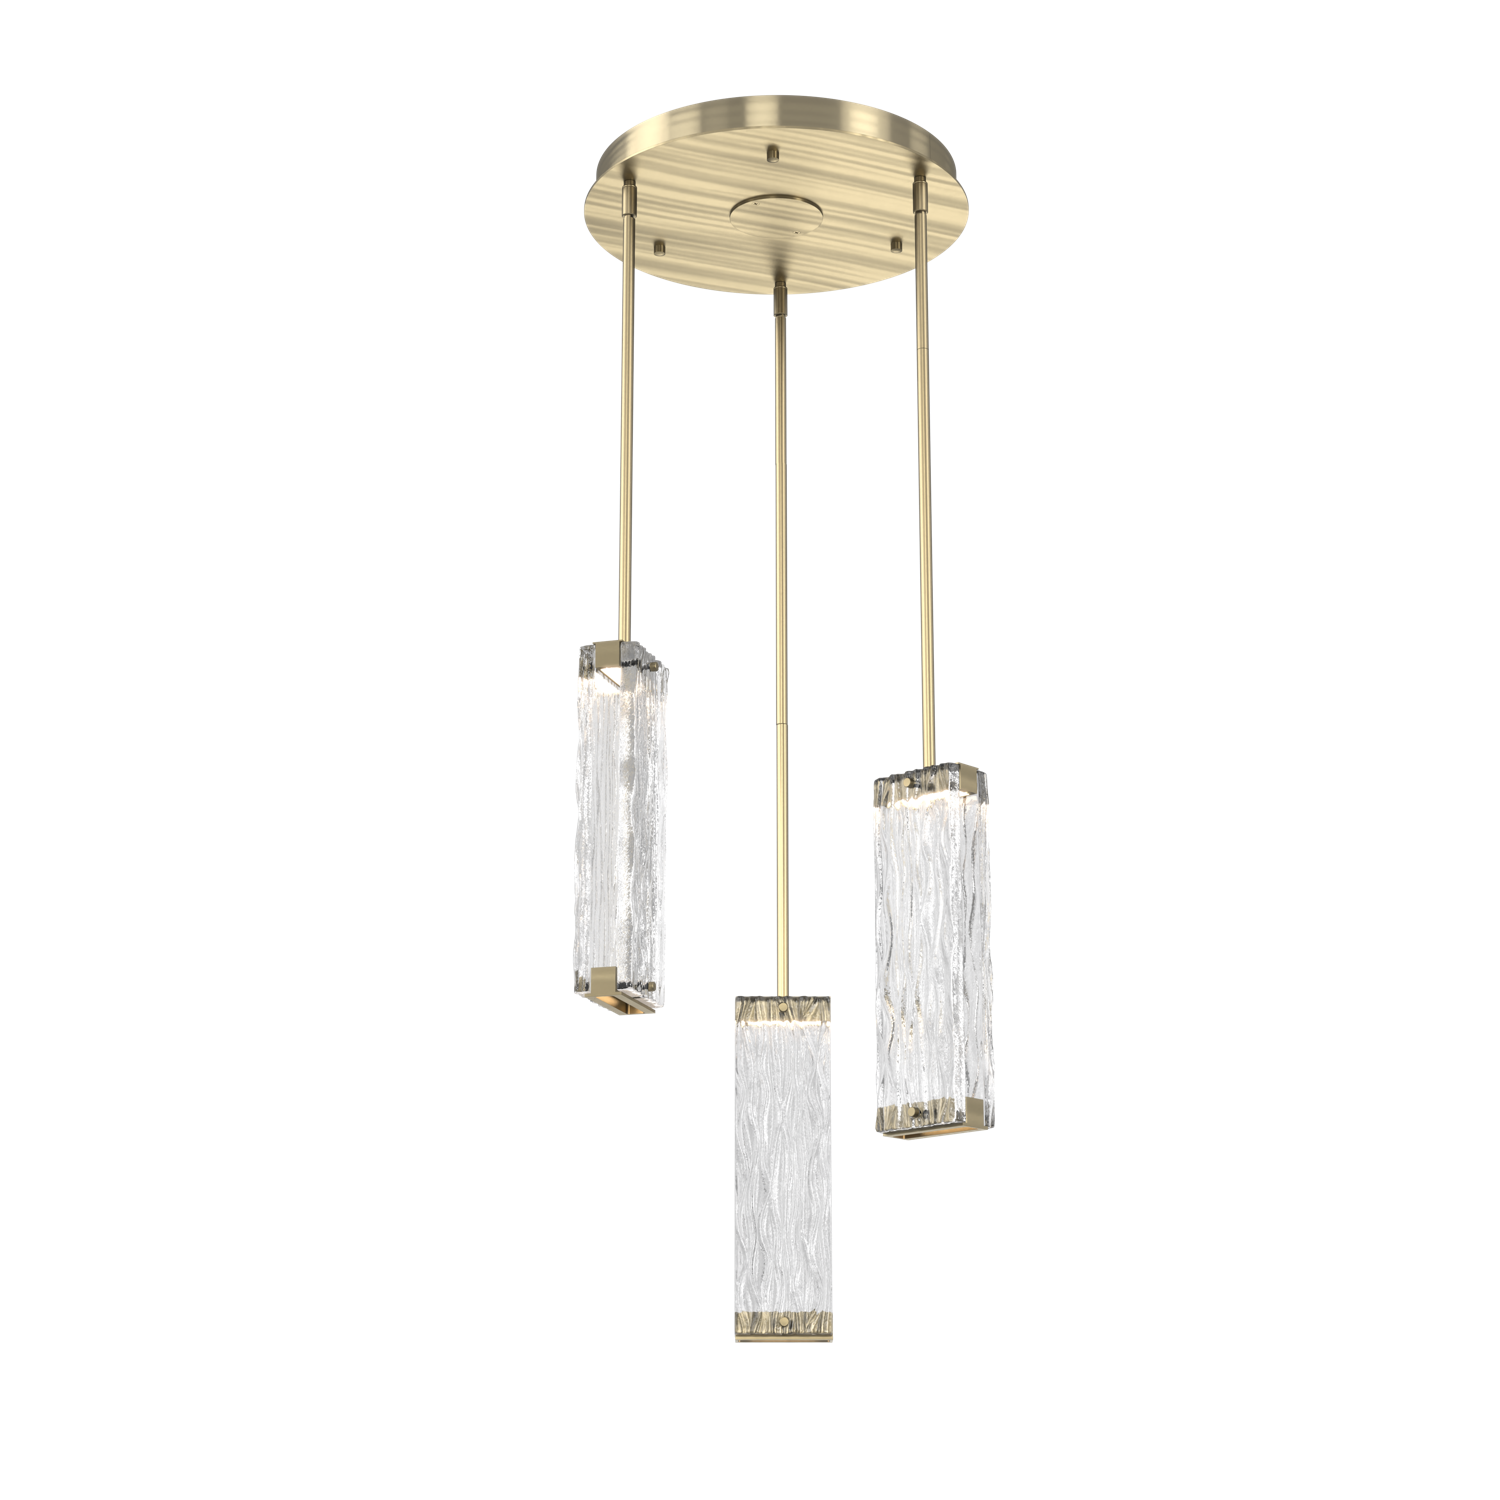 CHB0090-03-HB-TT-Hammerton-Studio-Tabulo-3-light-multi-pendant-chandelier-with-heritage-brass-finish-and-clear-tidal-cast-glass-shade-and-LED-lamping